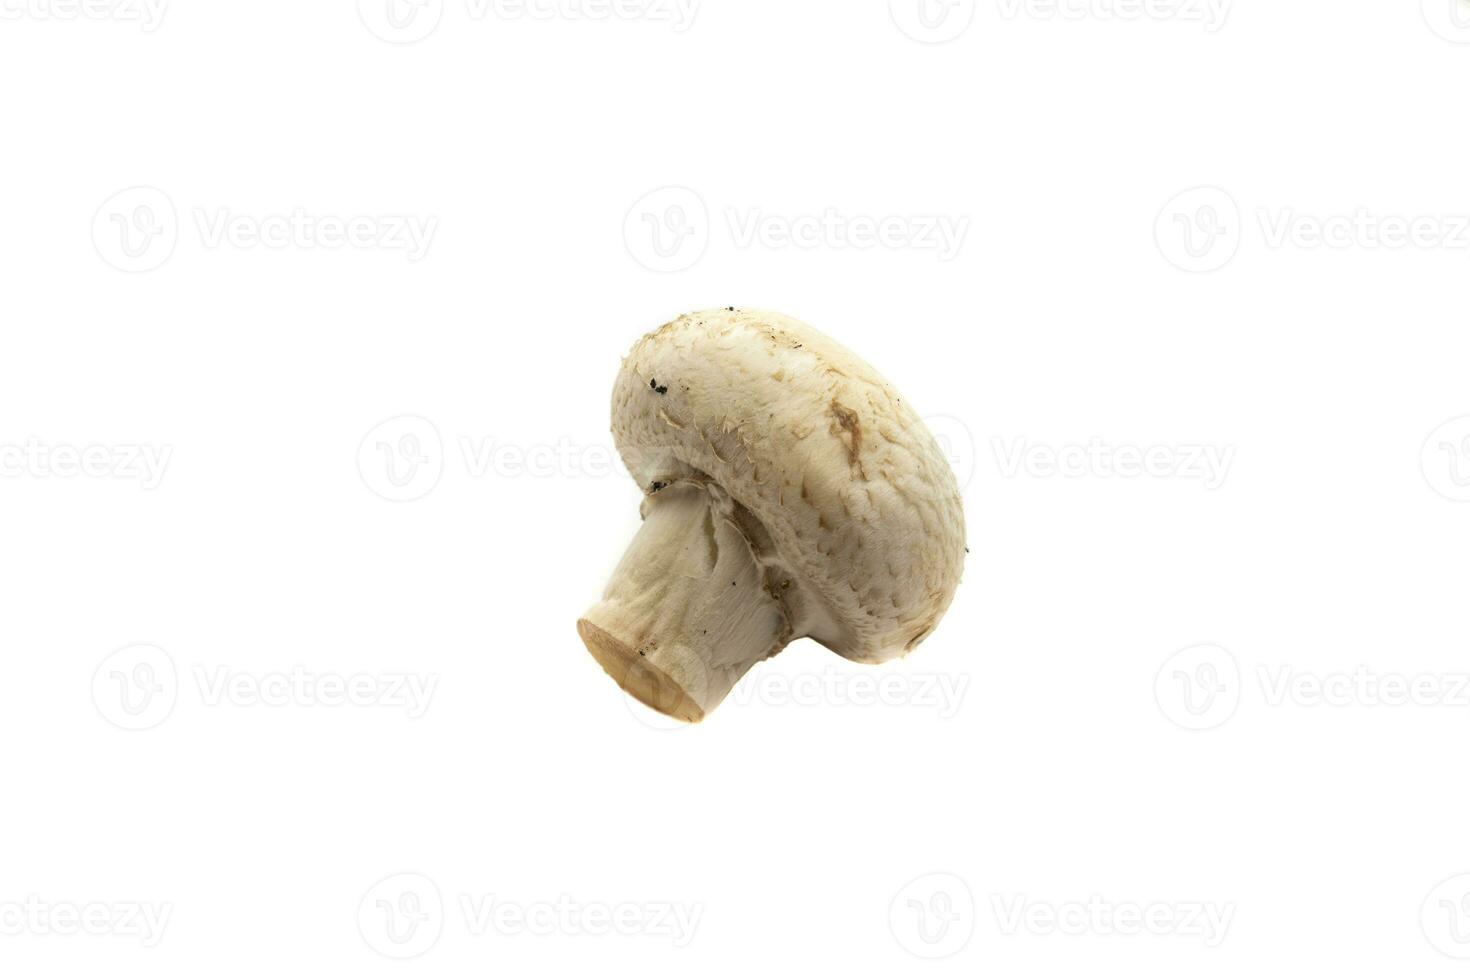 A mushroom, isolated on white background. The scientific name is Agaricus bisporus. It is the species of edible mushroom most used for cooking. photo